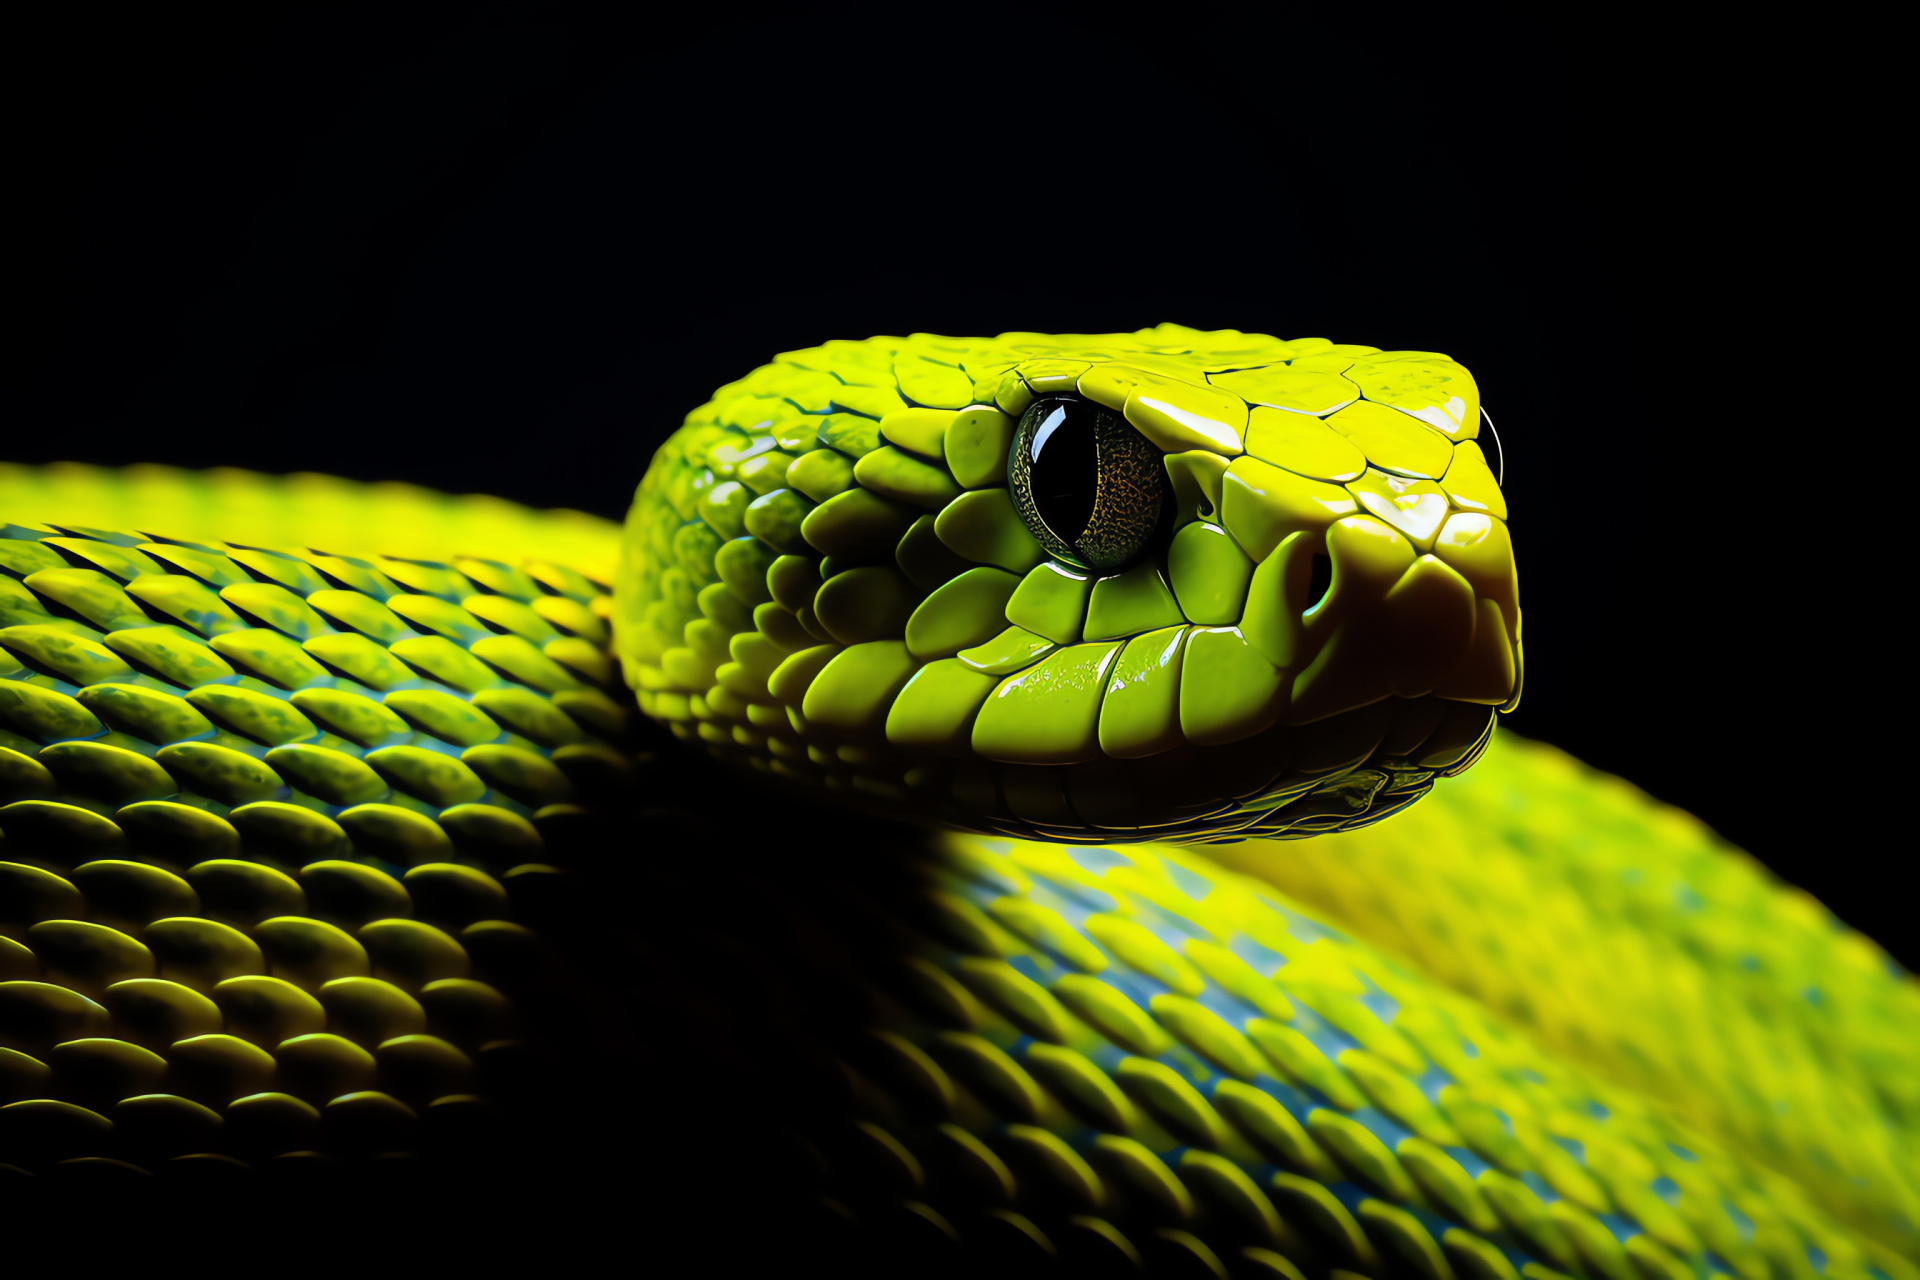 Electric yellow serpent, Strikingly slithering reptile, Deep contrasting backdrop, Nature's intense palette, Glowing snake presence, HD Desktop Wallpaper